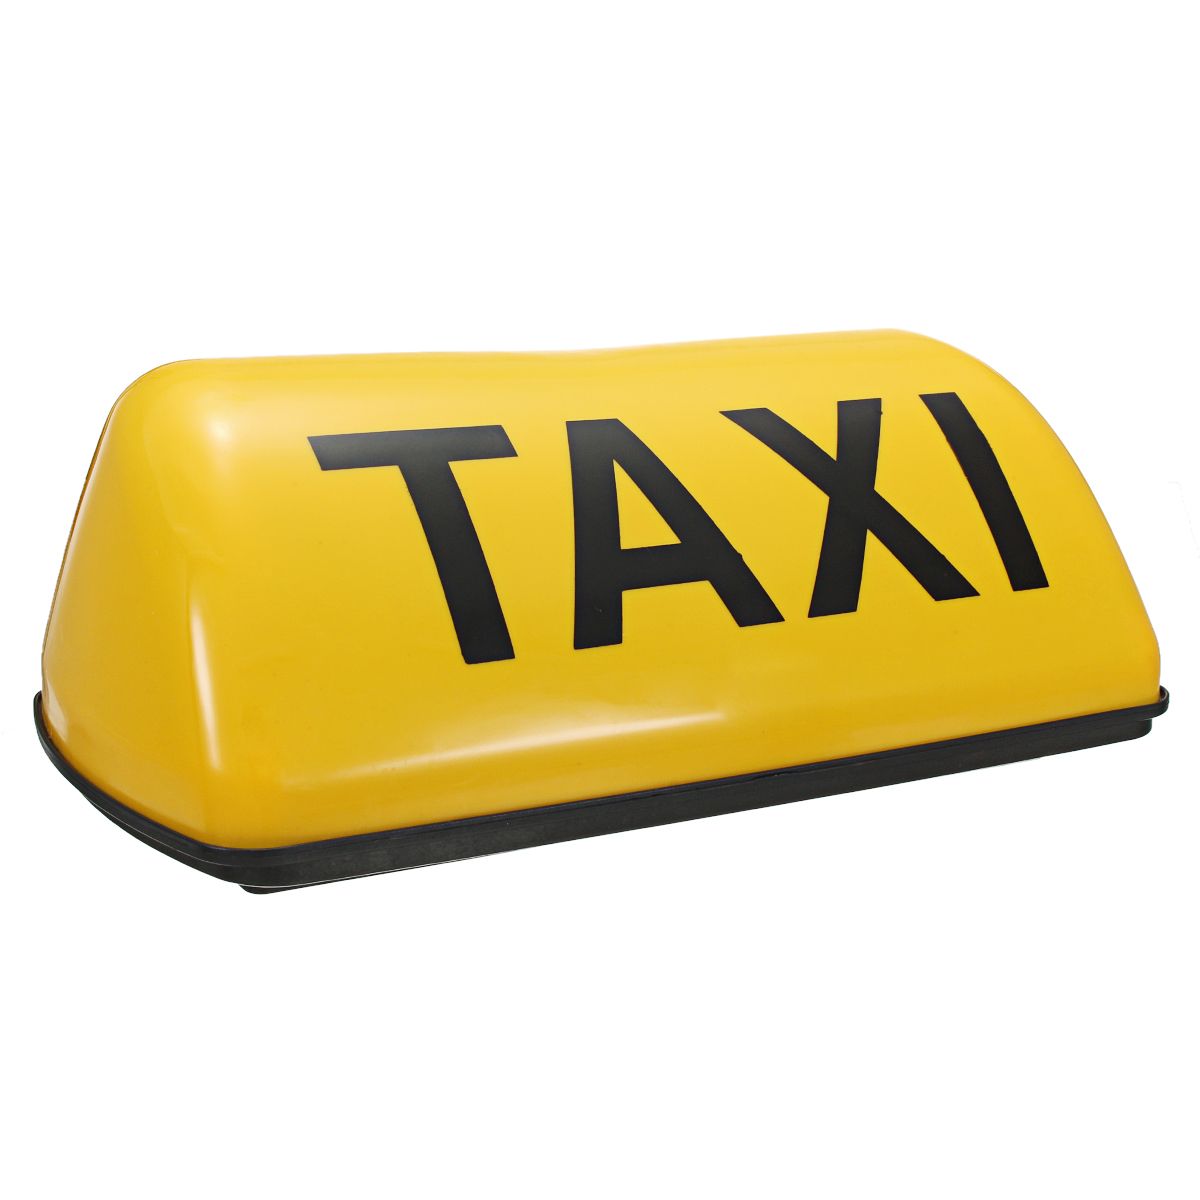 Waterproof-Taxi-Roof-Top-Sign-Light-Magnetic-Taximeter-Cab-Halogen-Lamp-12V-White-Yellow-1317629